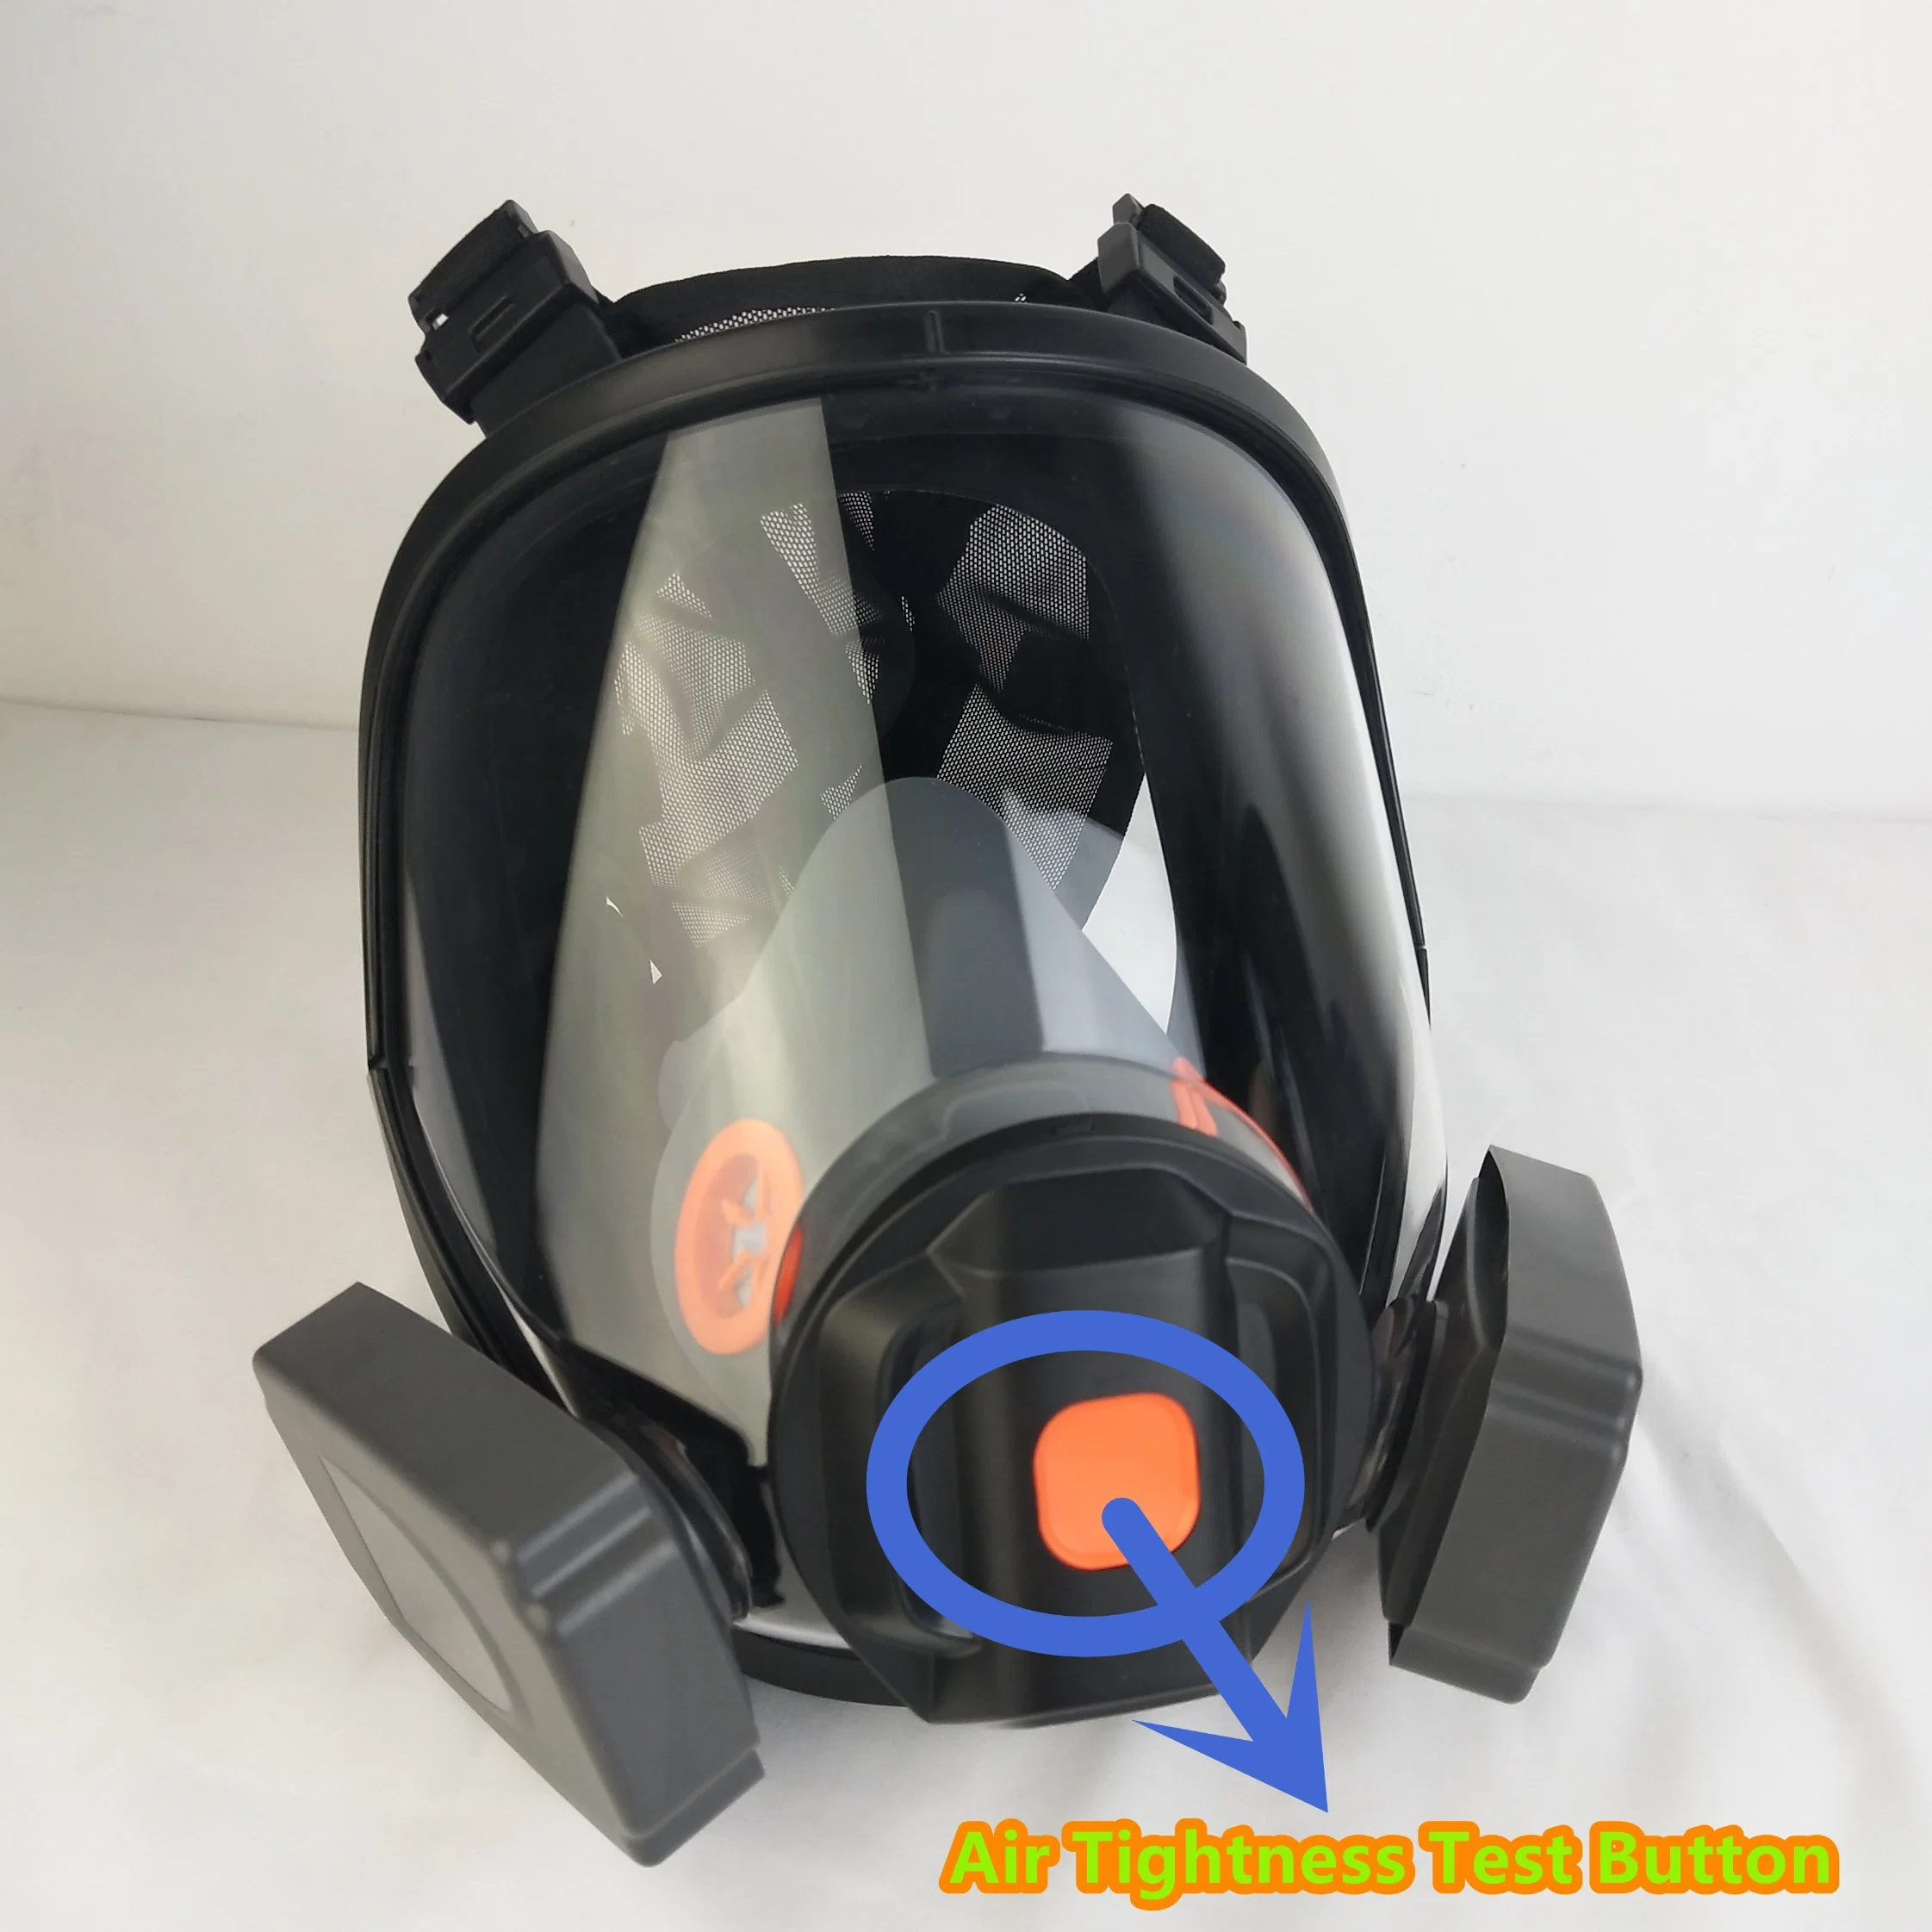 Dust Chemical Full Face Eye Protection Safety PPE Toxic Gas Mask